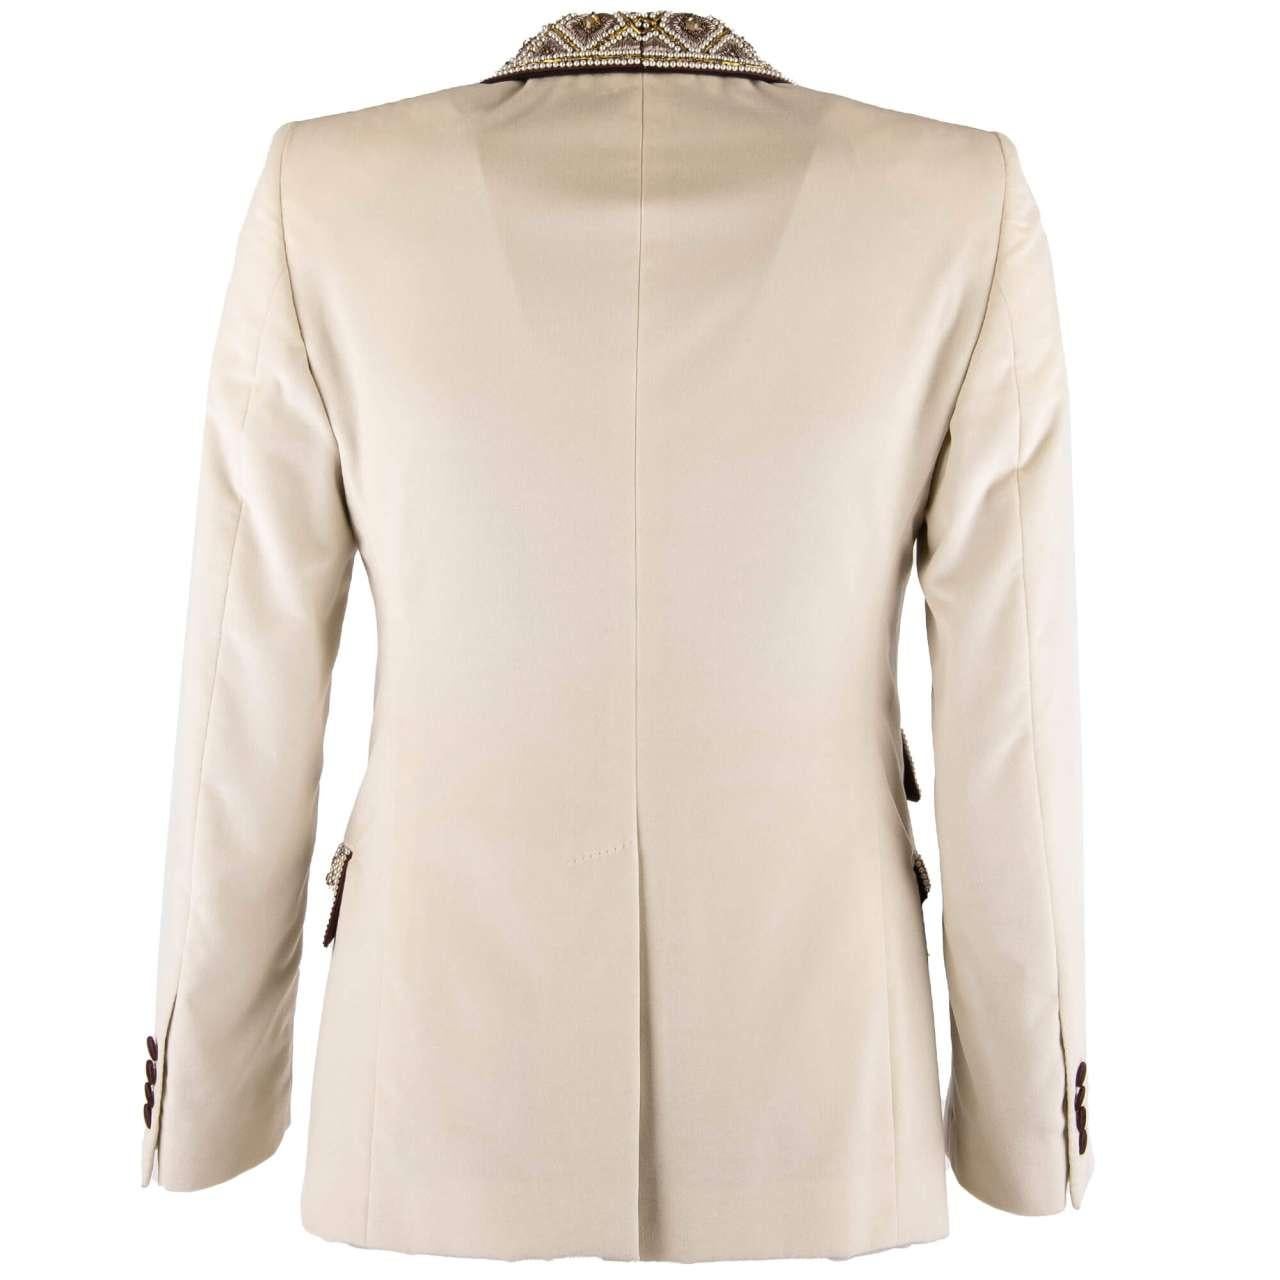 D&G Velvet Tuxedo Blazer with Crystals, Pearls and Gold Embroidery White 56 For Sale 1